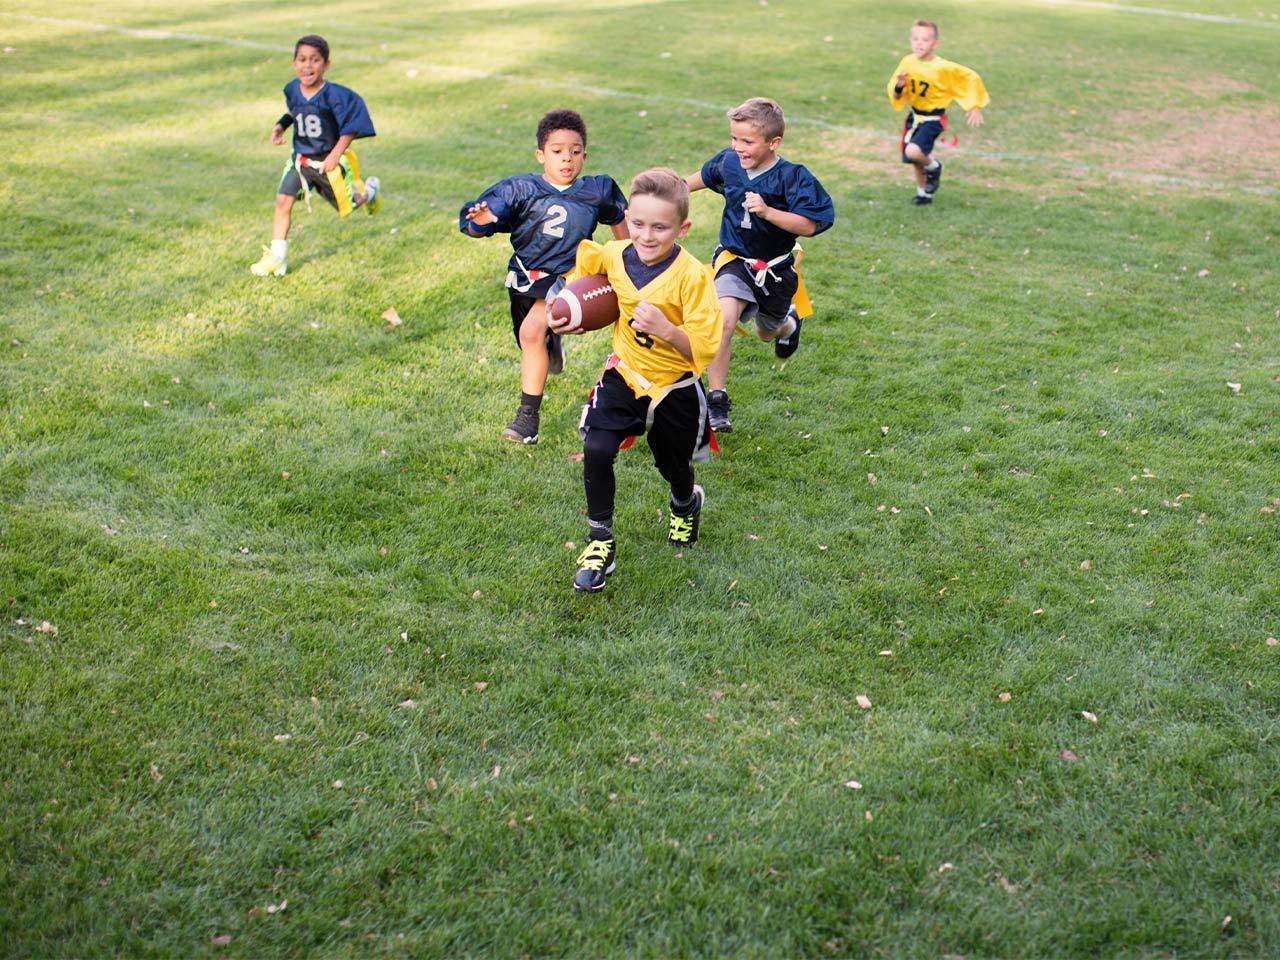 A group of children play flag football on a green field.